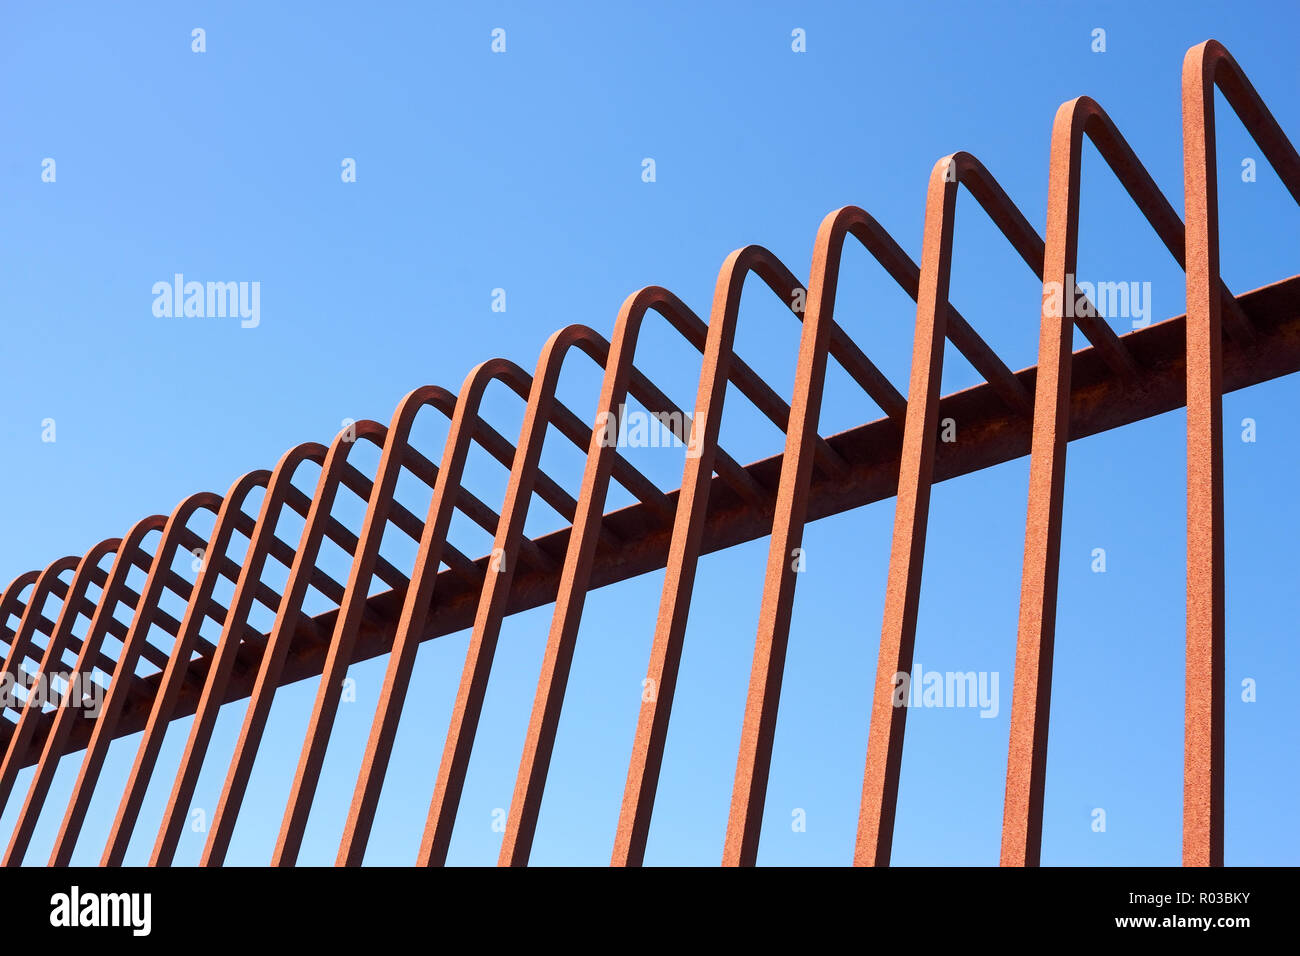 Detail of fence with bent metal rods against a blue sky Stock Photo